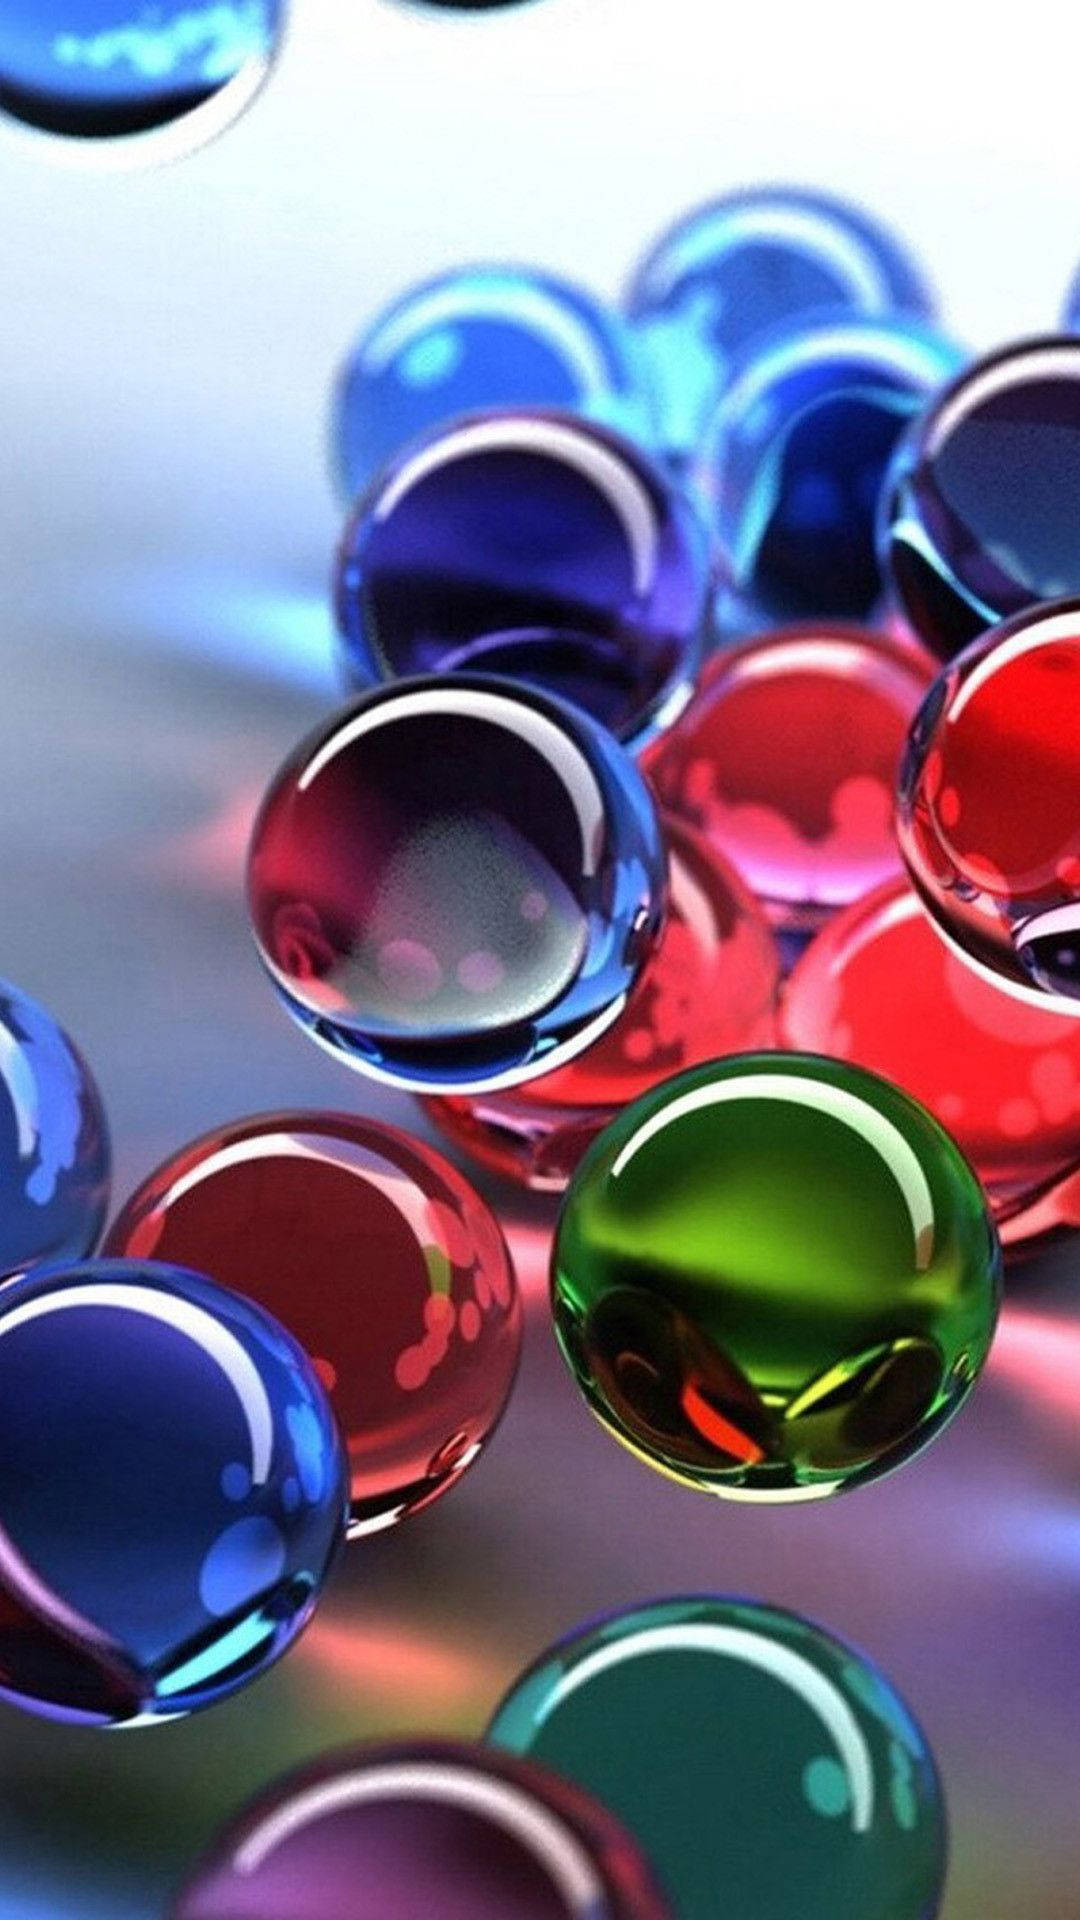 A Captivating View Of Colorful 3d Transparent Balls Background